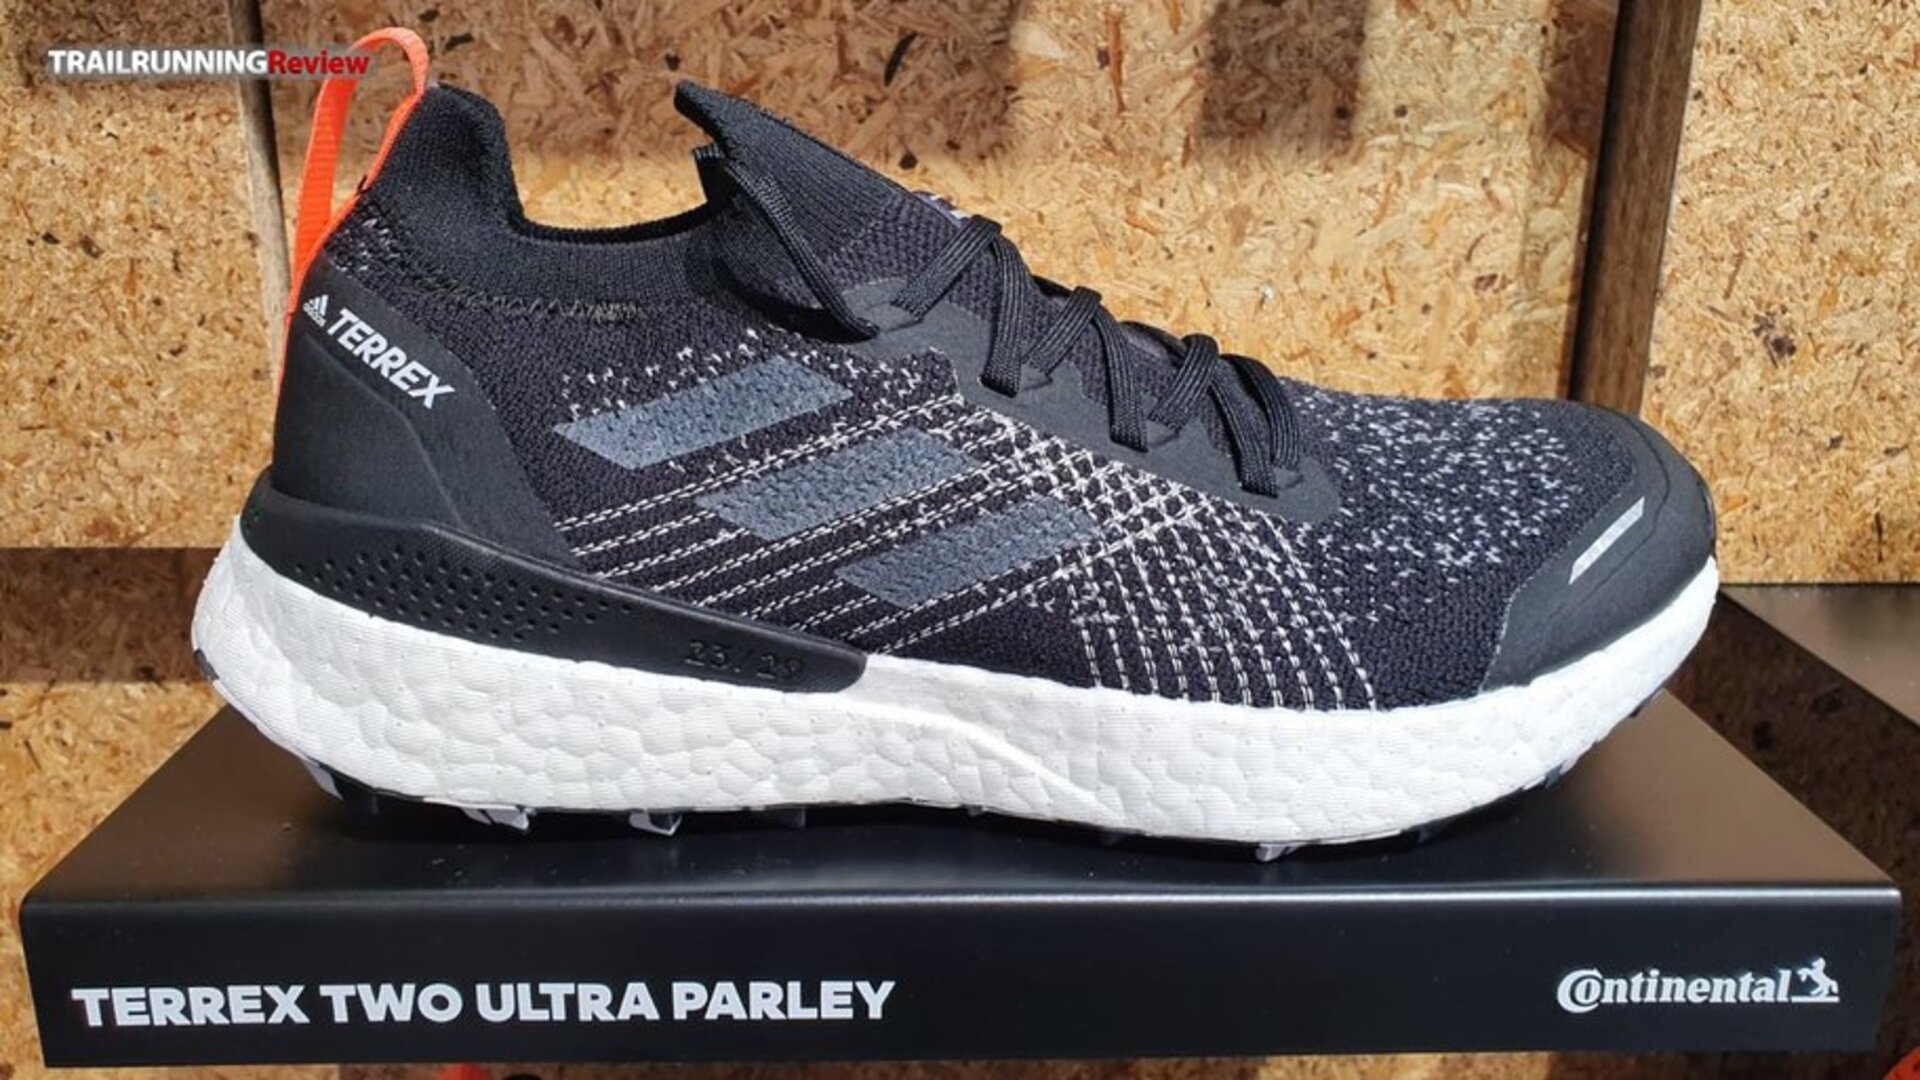 Adidas Terrex Two Ultra Parley - TRAILRUNNINGReview.com